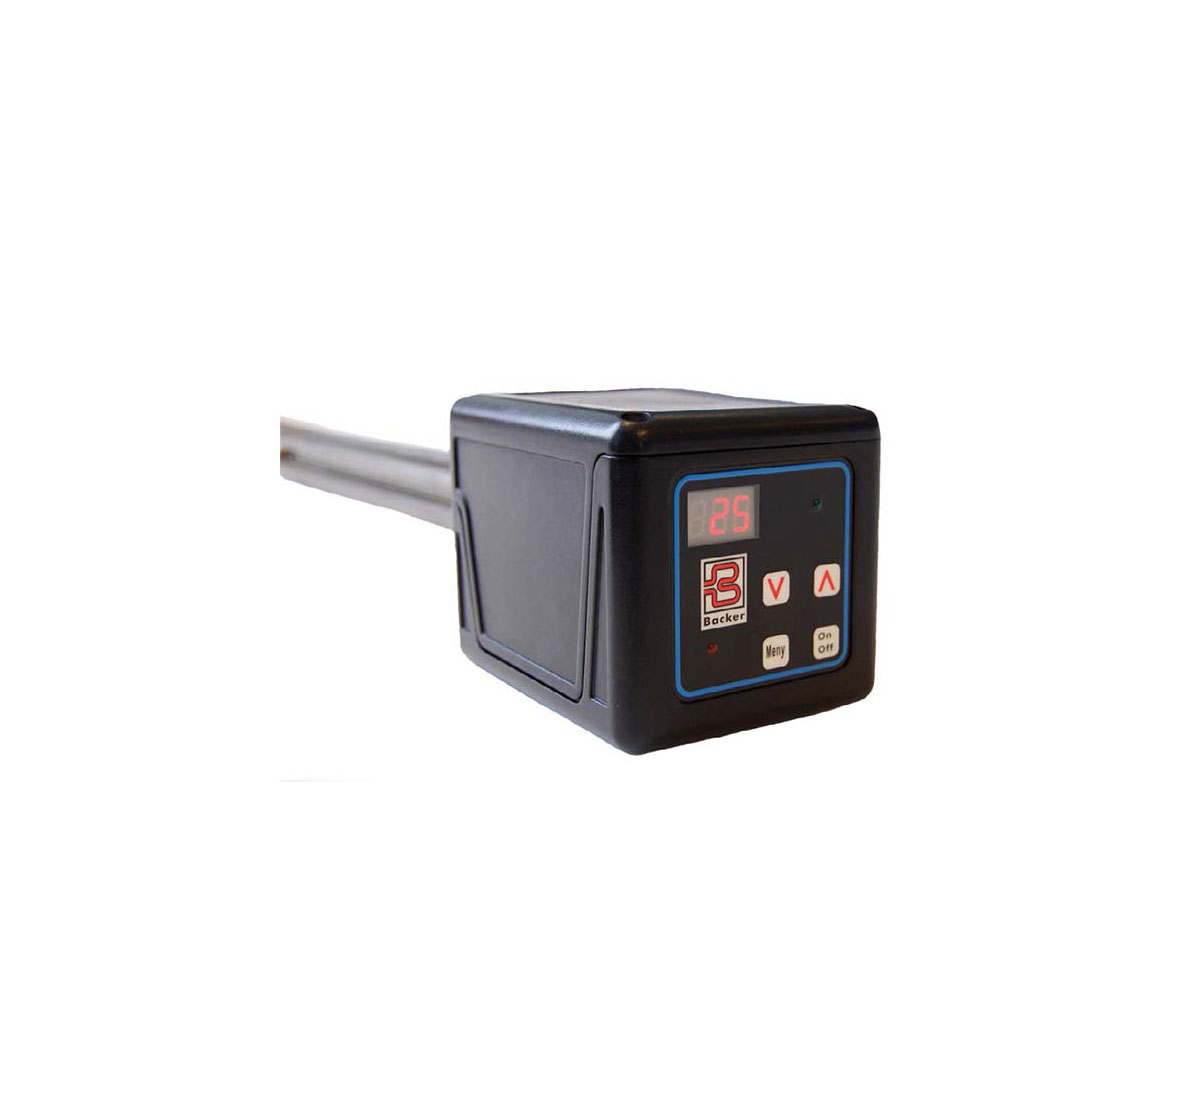 A picture of a terminal box K31E complete with immersion heater